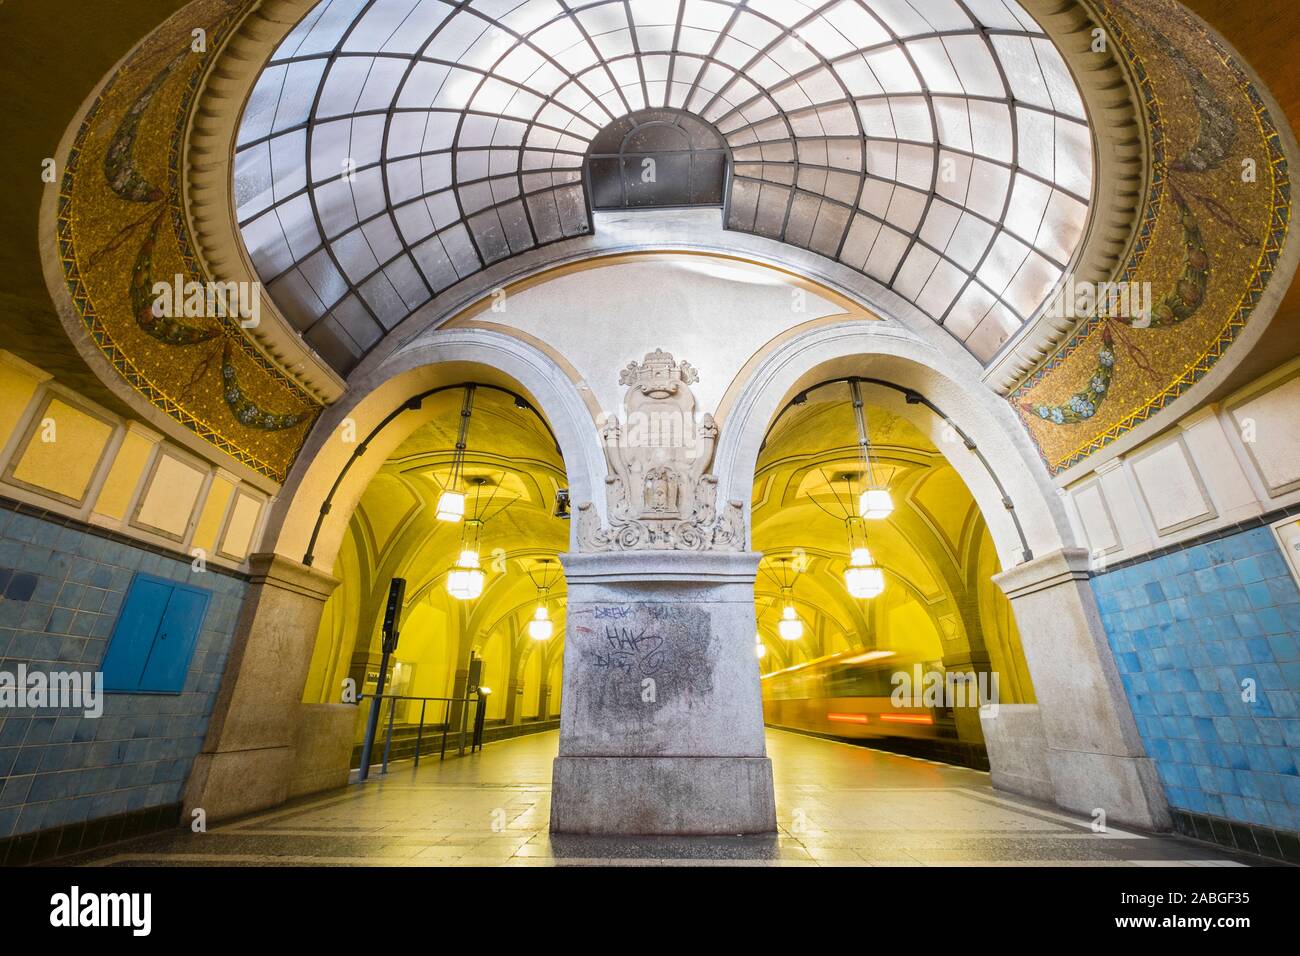 Ornate old architecture at Heidelberger Station on Berlin subway system in Germany Stock Photo